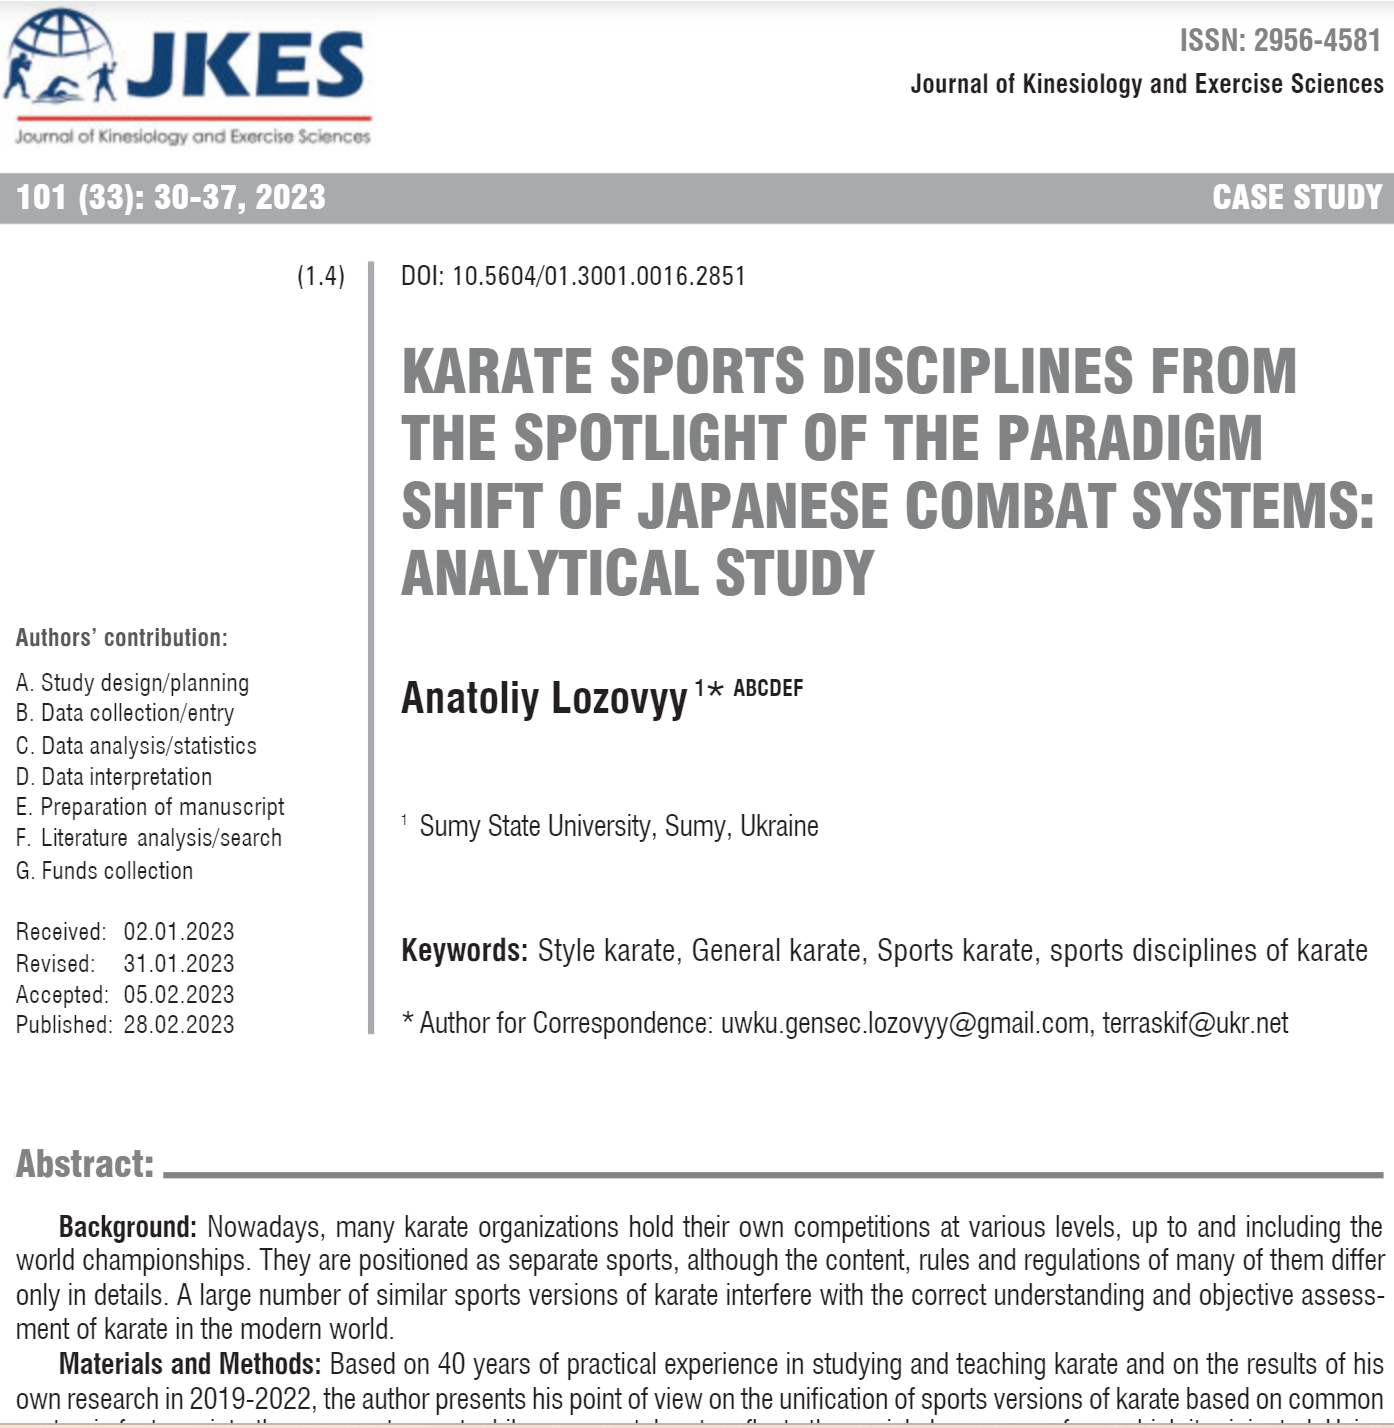 Karate Sports Disciplines from the Spotlight of the Paradigm Shift of Japanese Combat Systems: Analytical Study